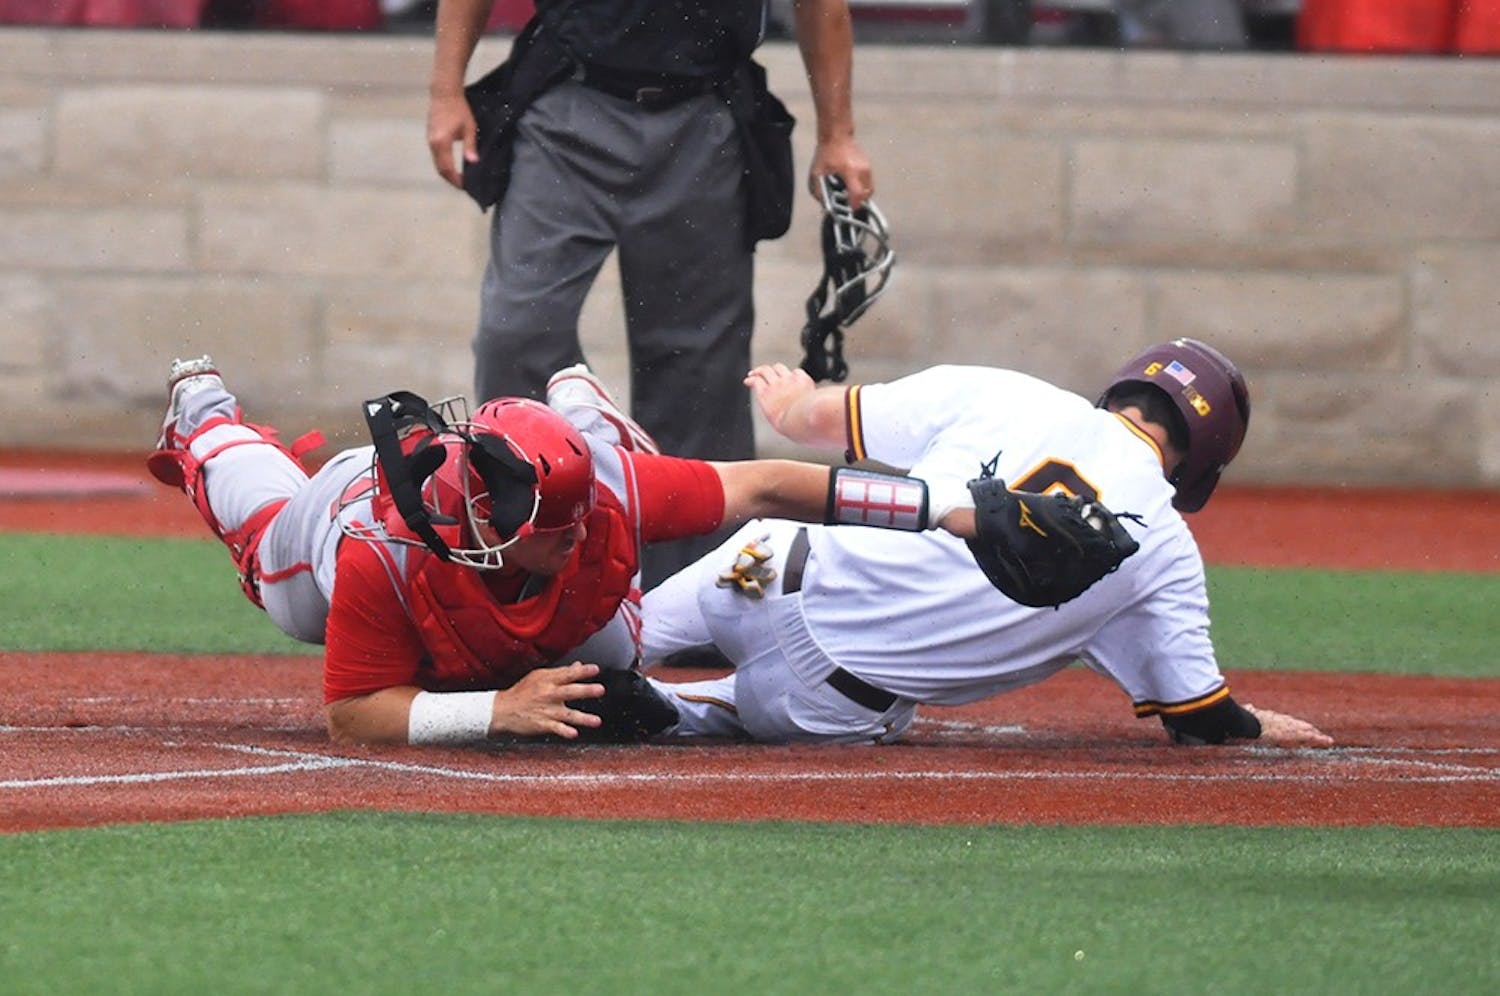 Sophomore catcher Ryan Fineman tries to tag out Minnesota’s Terrin Vavra at home plate on May 24, 2017. Vavra scored one of Minnesota’s 5 runs in their 5-4 win over the Hoosiers.